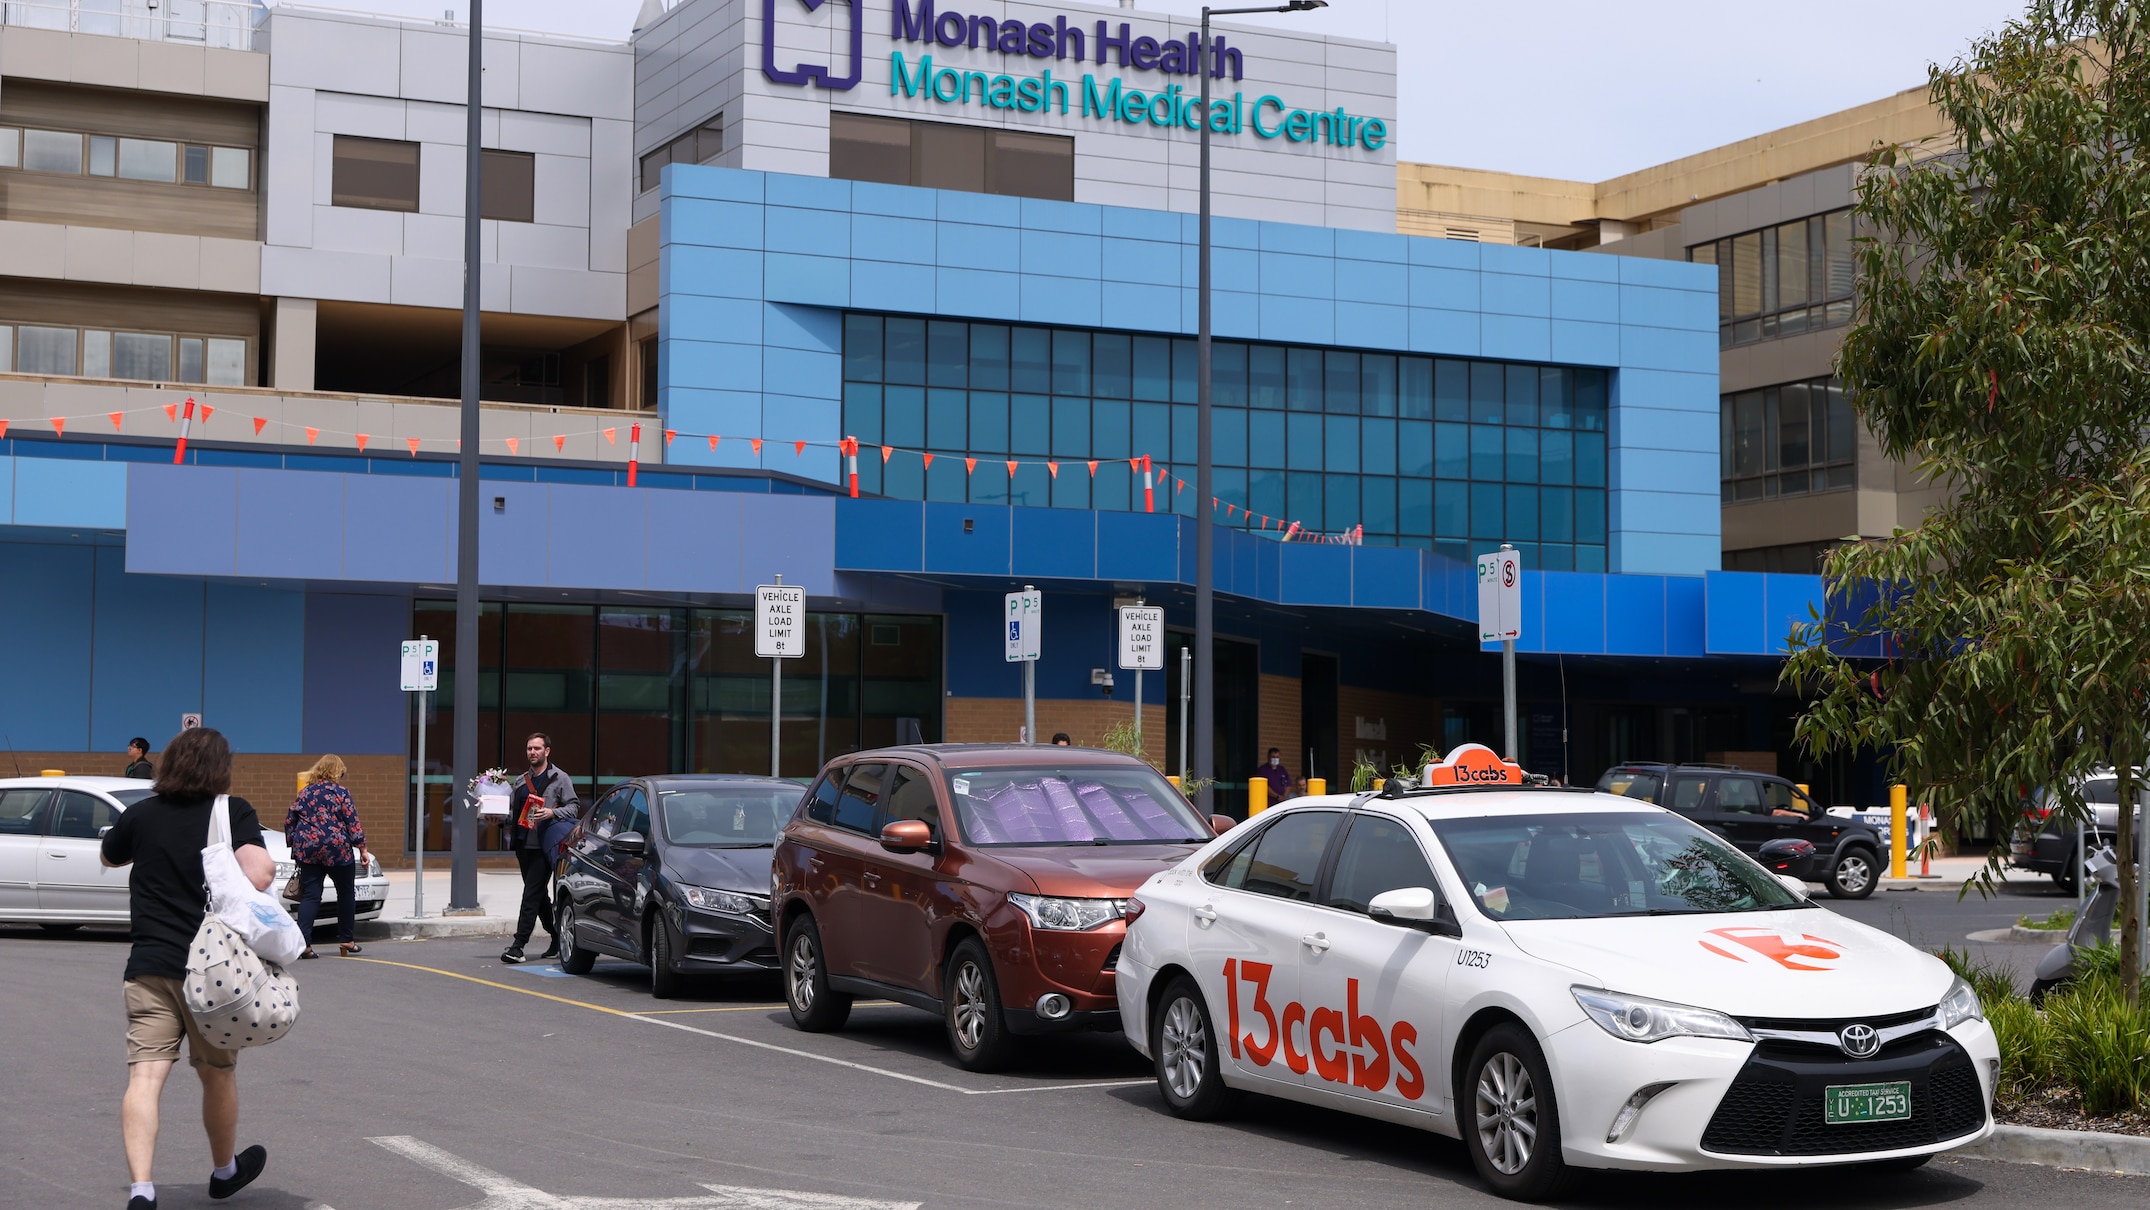 radiation leaked from cancer treatment room at monash medical centre in melbourne, documents reveal